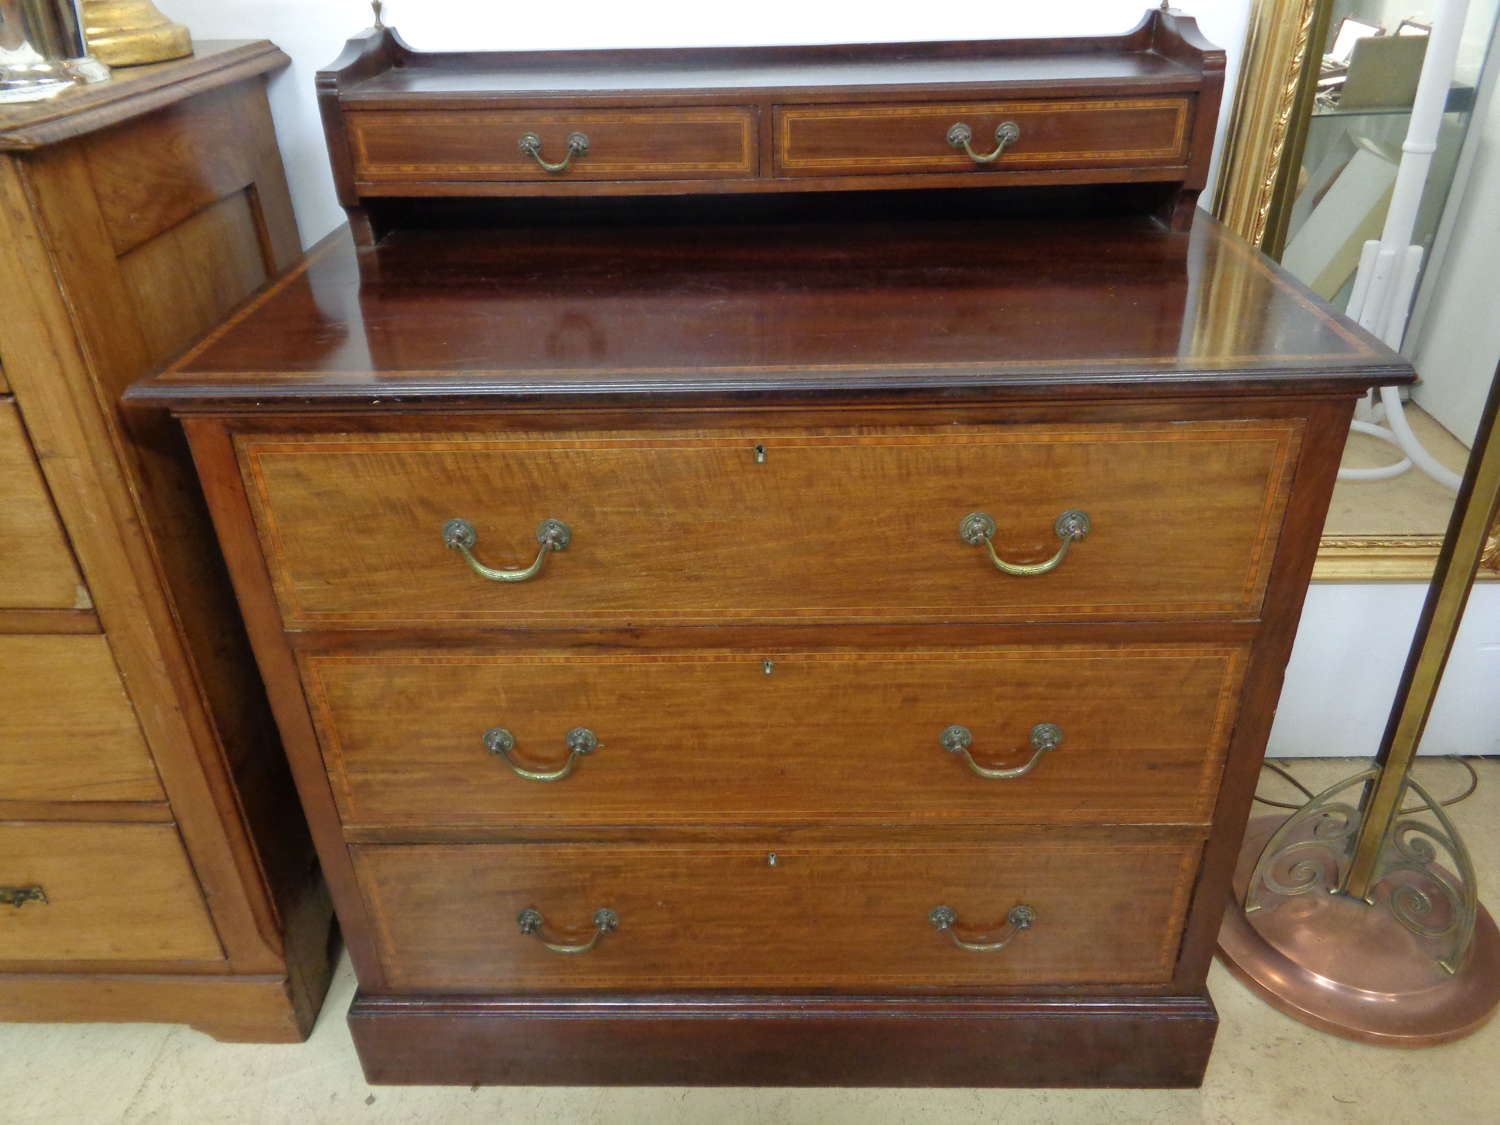 Antique ''Jas Shoolbred'' Chest of Drawers